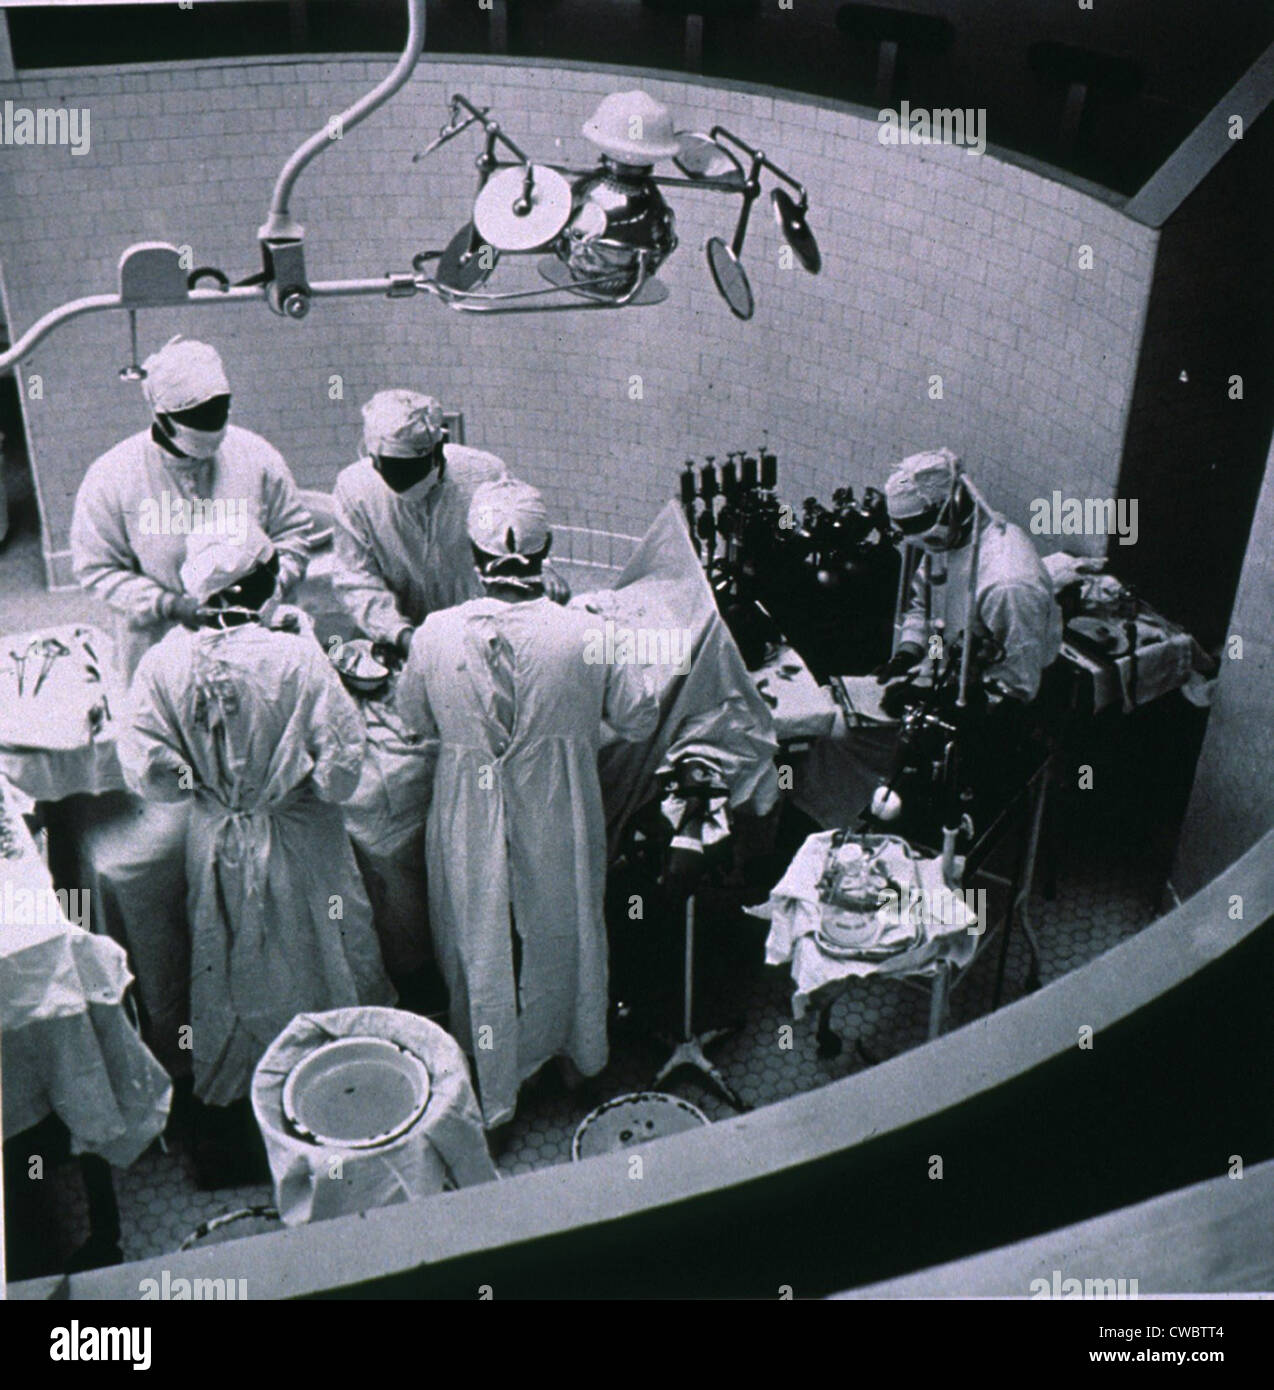 Heart surgery performed in the 1950s. Stock Photo